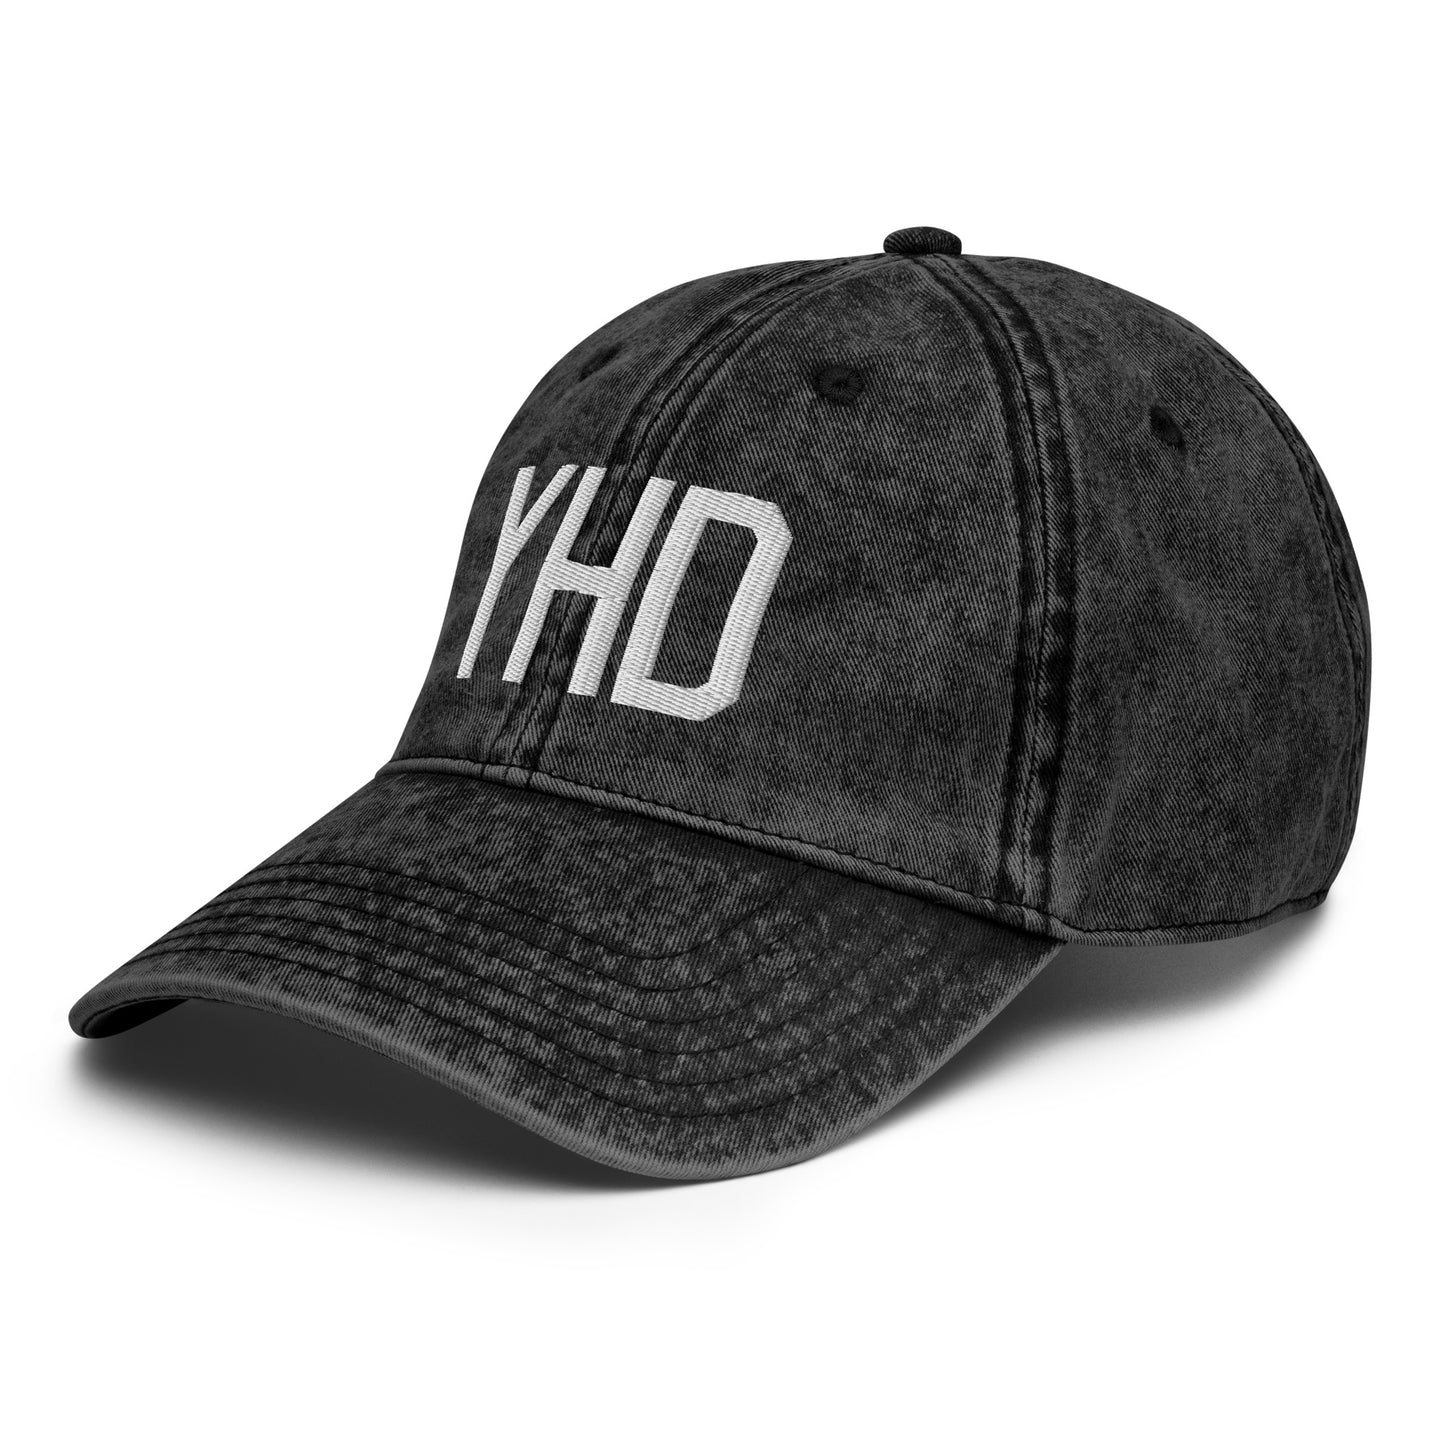 Airport Code Twill Cap - White • YHD Dryden • YHM Designs - Image 01